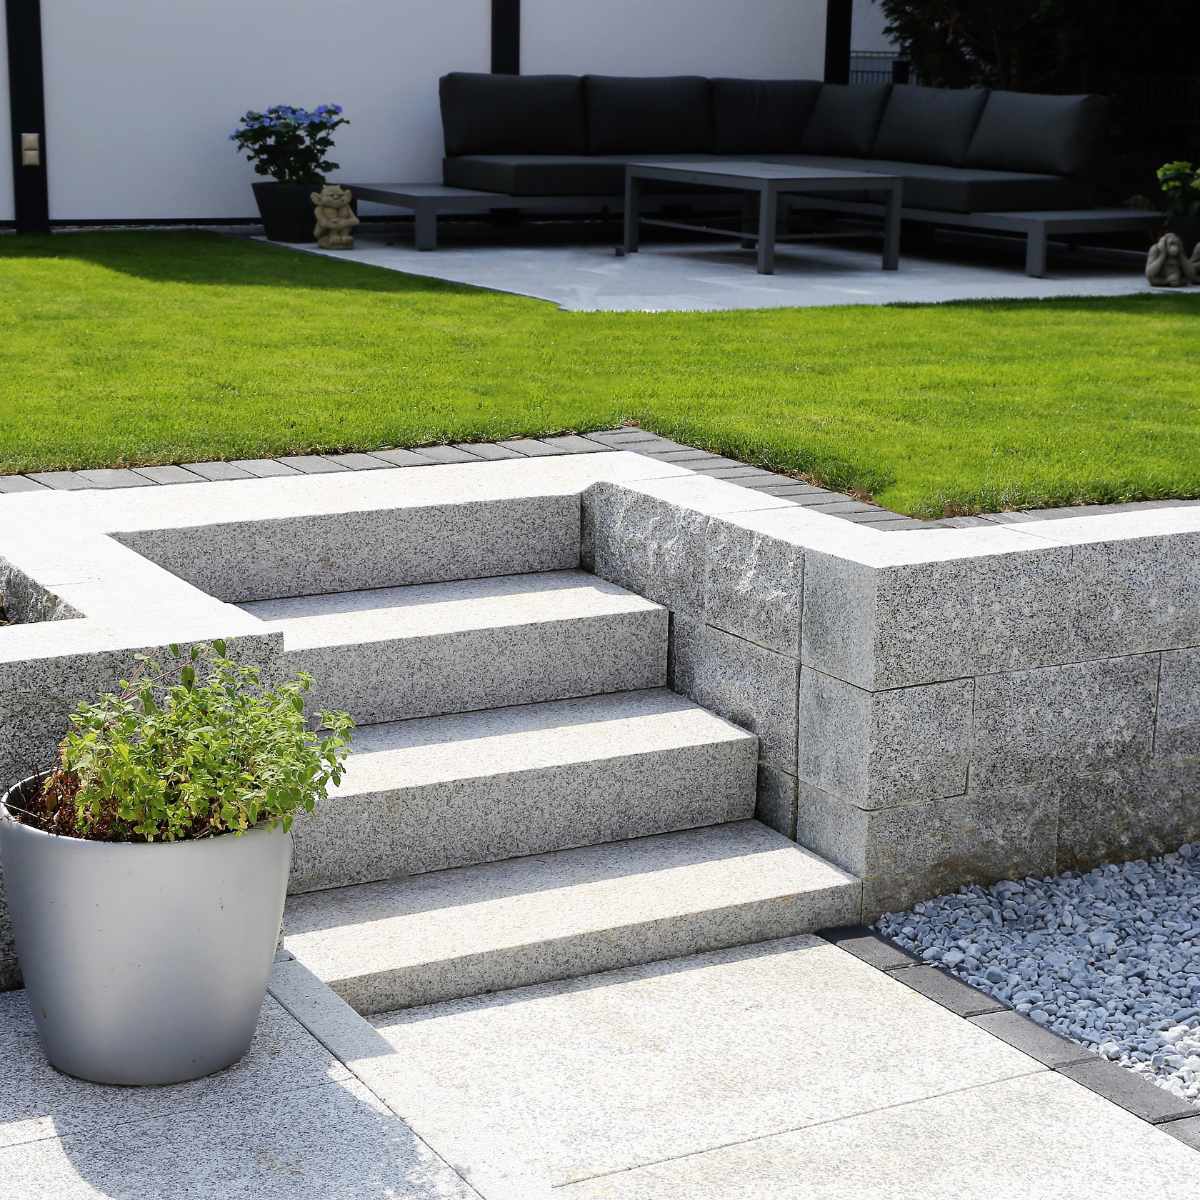 How to Build Steps in your Garden (Easy Guide)